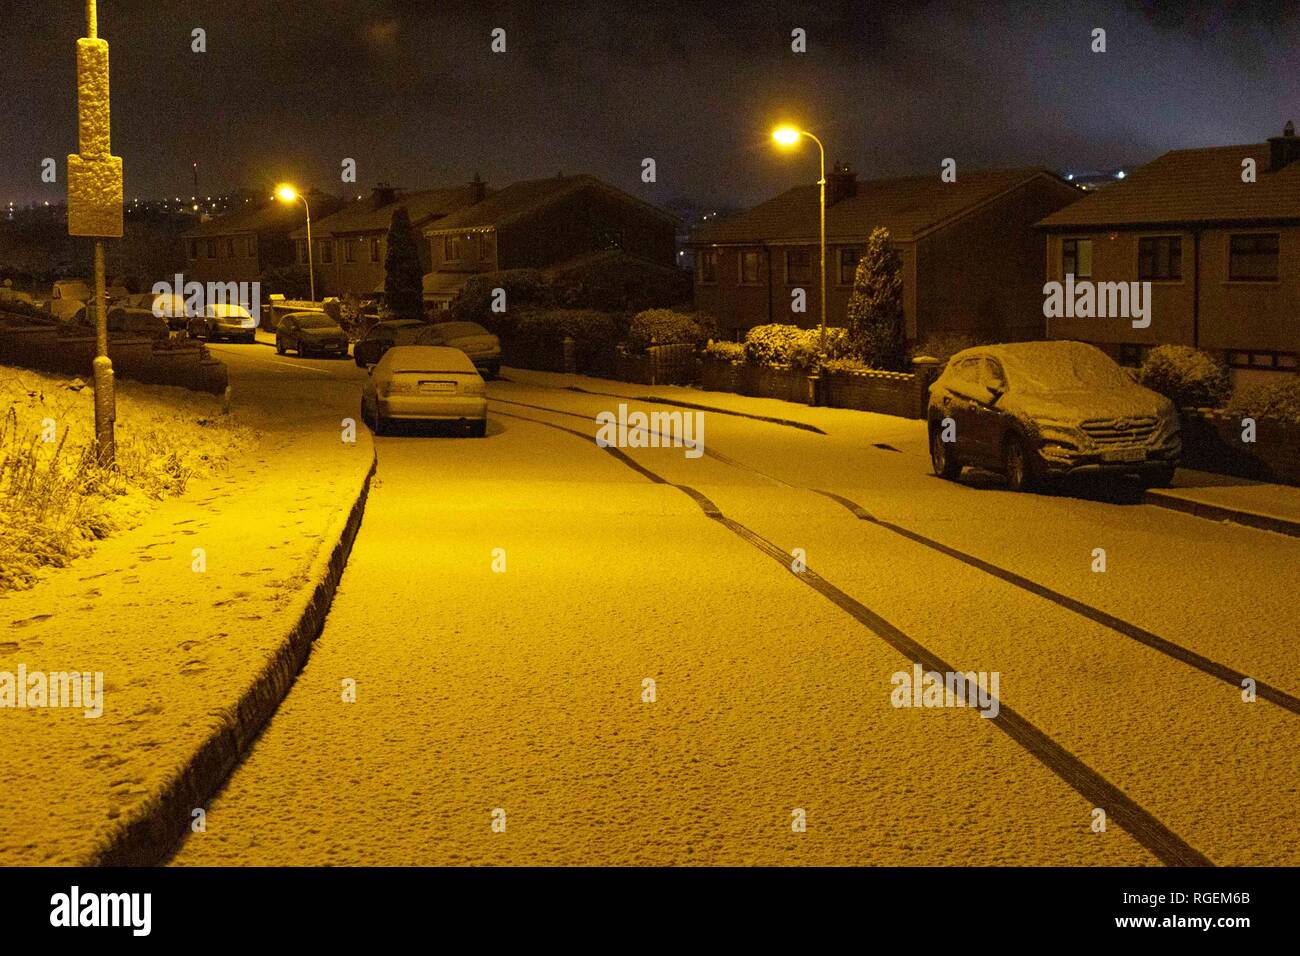 Cork, Ireland, 29th January, 2019.   Snow in Ballyvolane, Cork City. Today a Yellow Weather Warning was put in place across the country by MET Eireann for ice and snow. Heavy snowfall hit parts of Cork City and County throughout the day making some roads treacherous and driving particularly dangerous throughout the city. Pictured here is the snow throughout the Ballyvolane/ Dublin Hill Area. Credit: Damian Coleman/Alamy Live News. Stock Photo